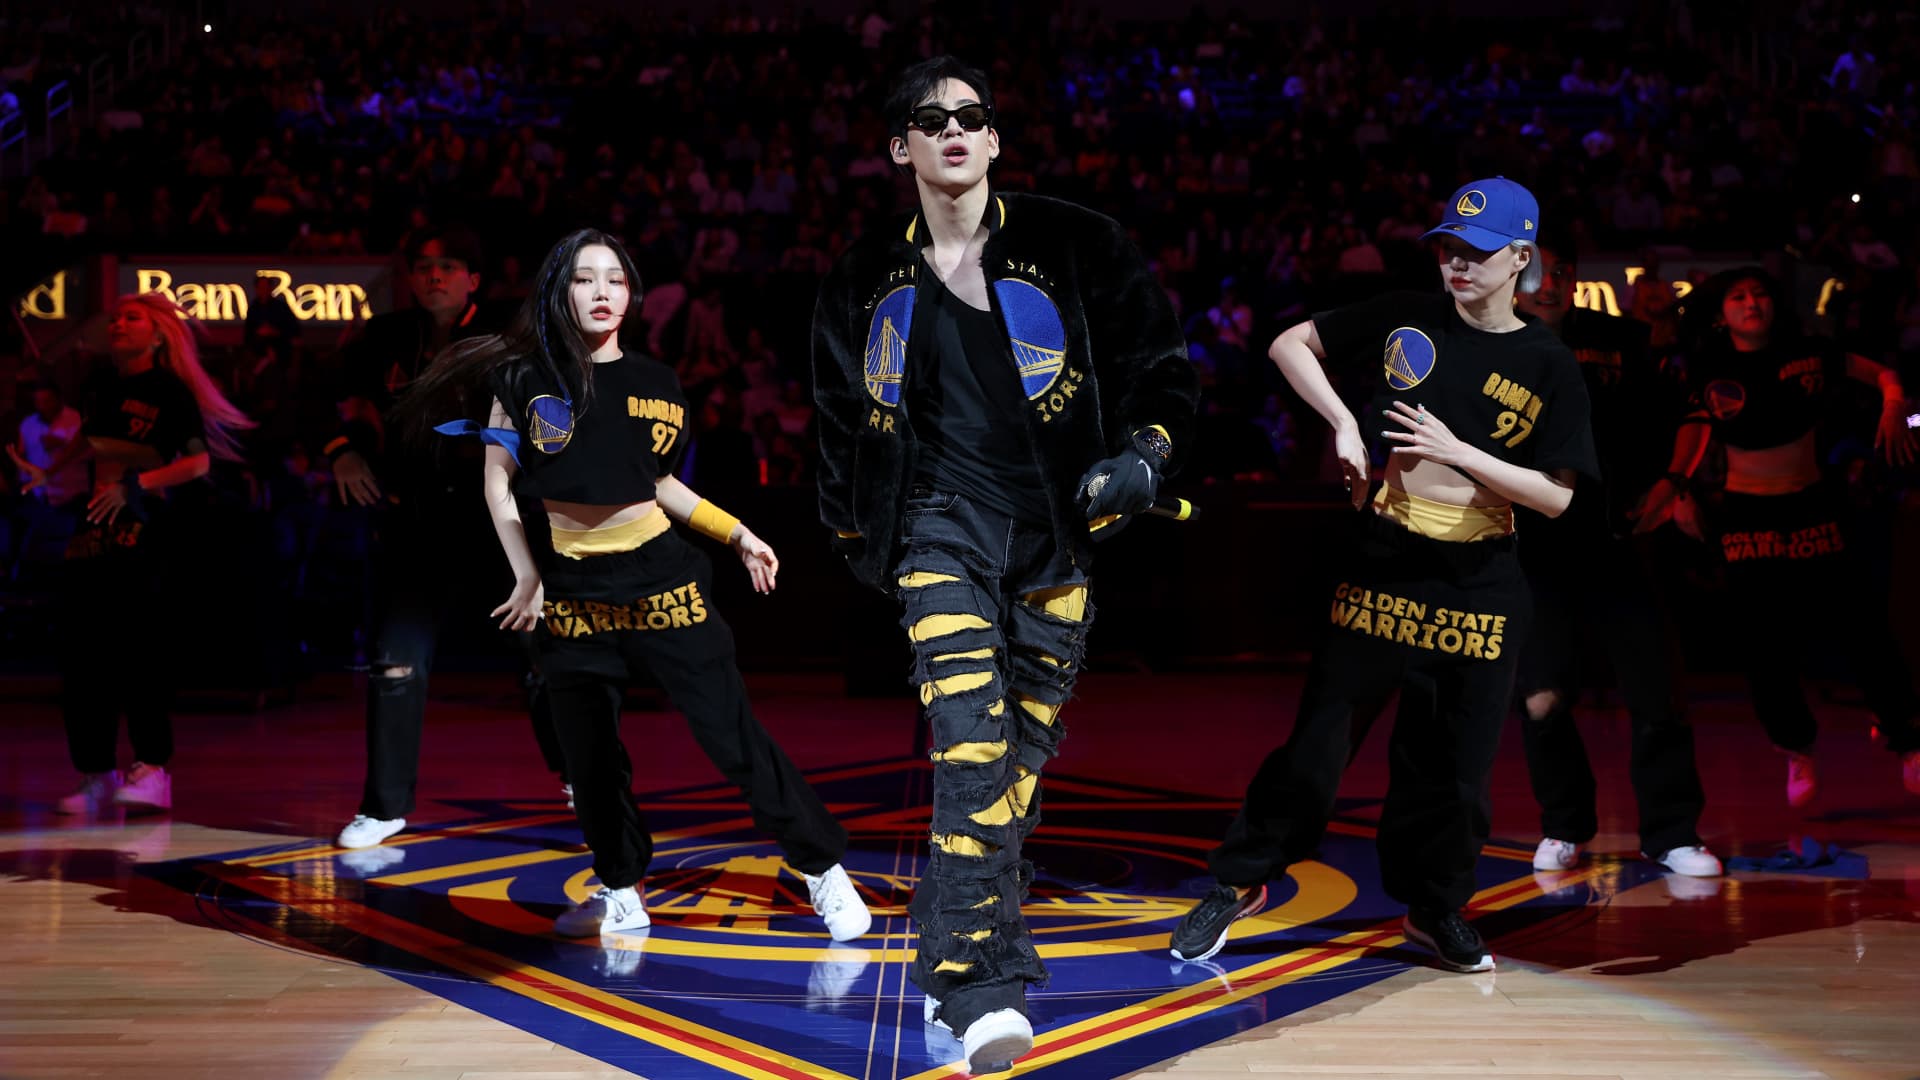 Golden State Warriors launch entertainment division, will feature BamBam